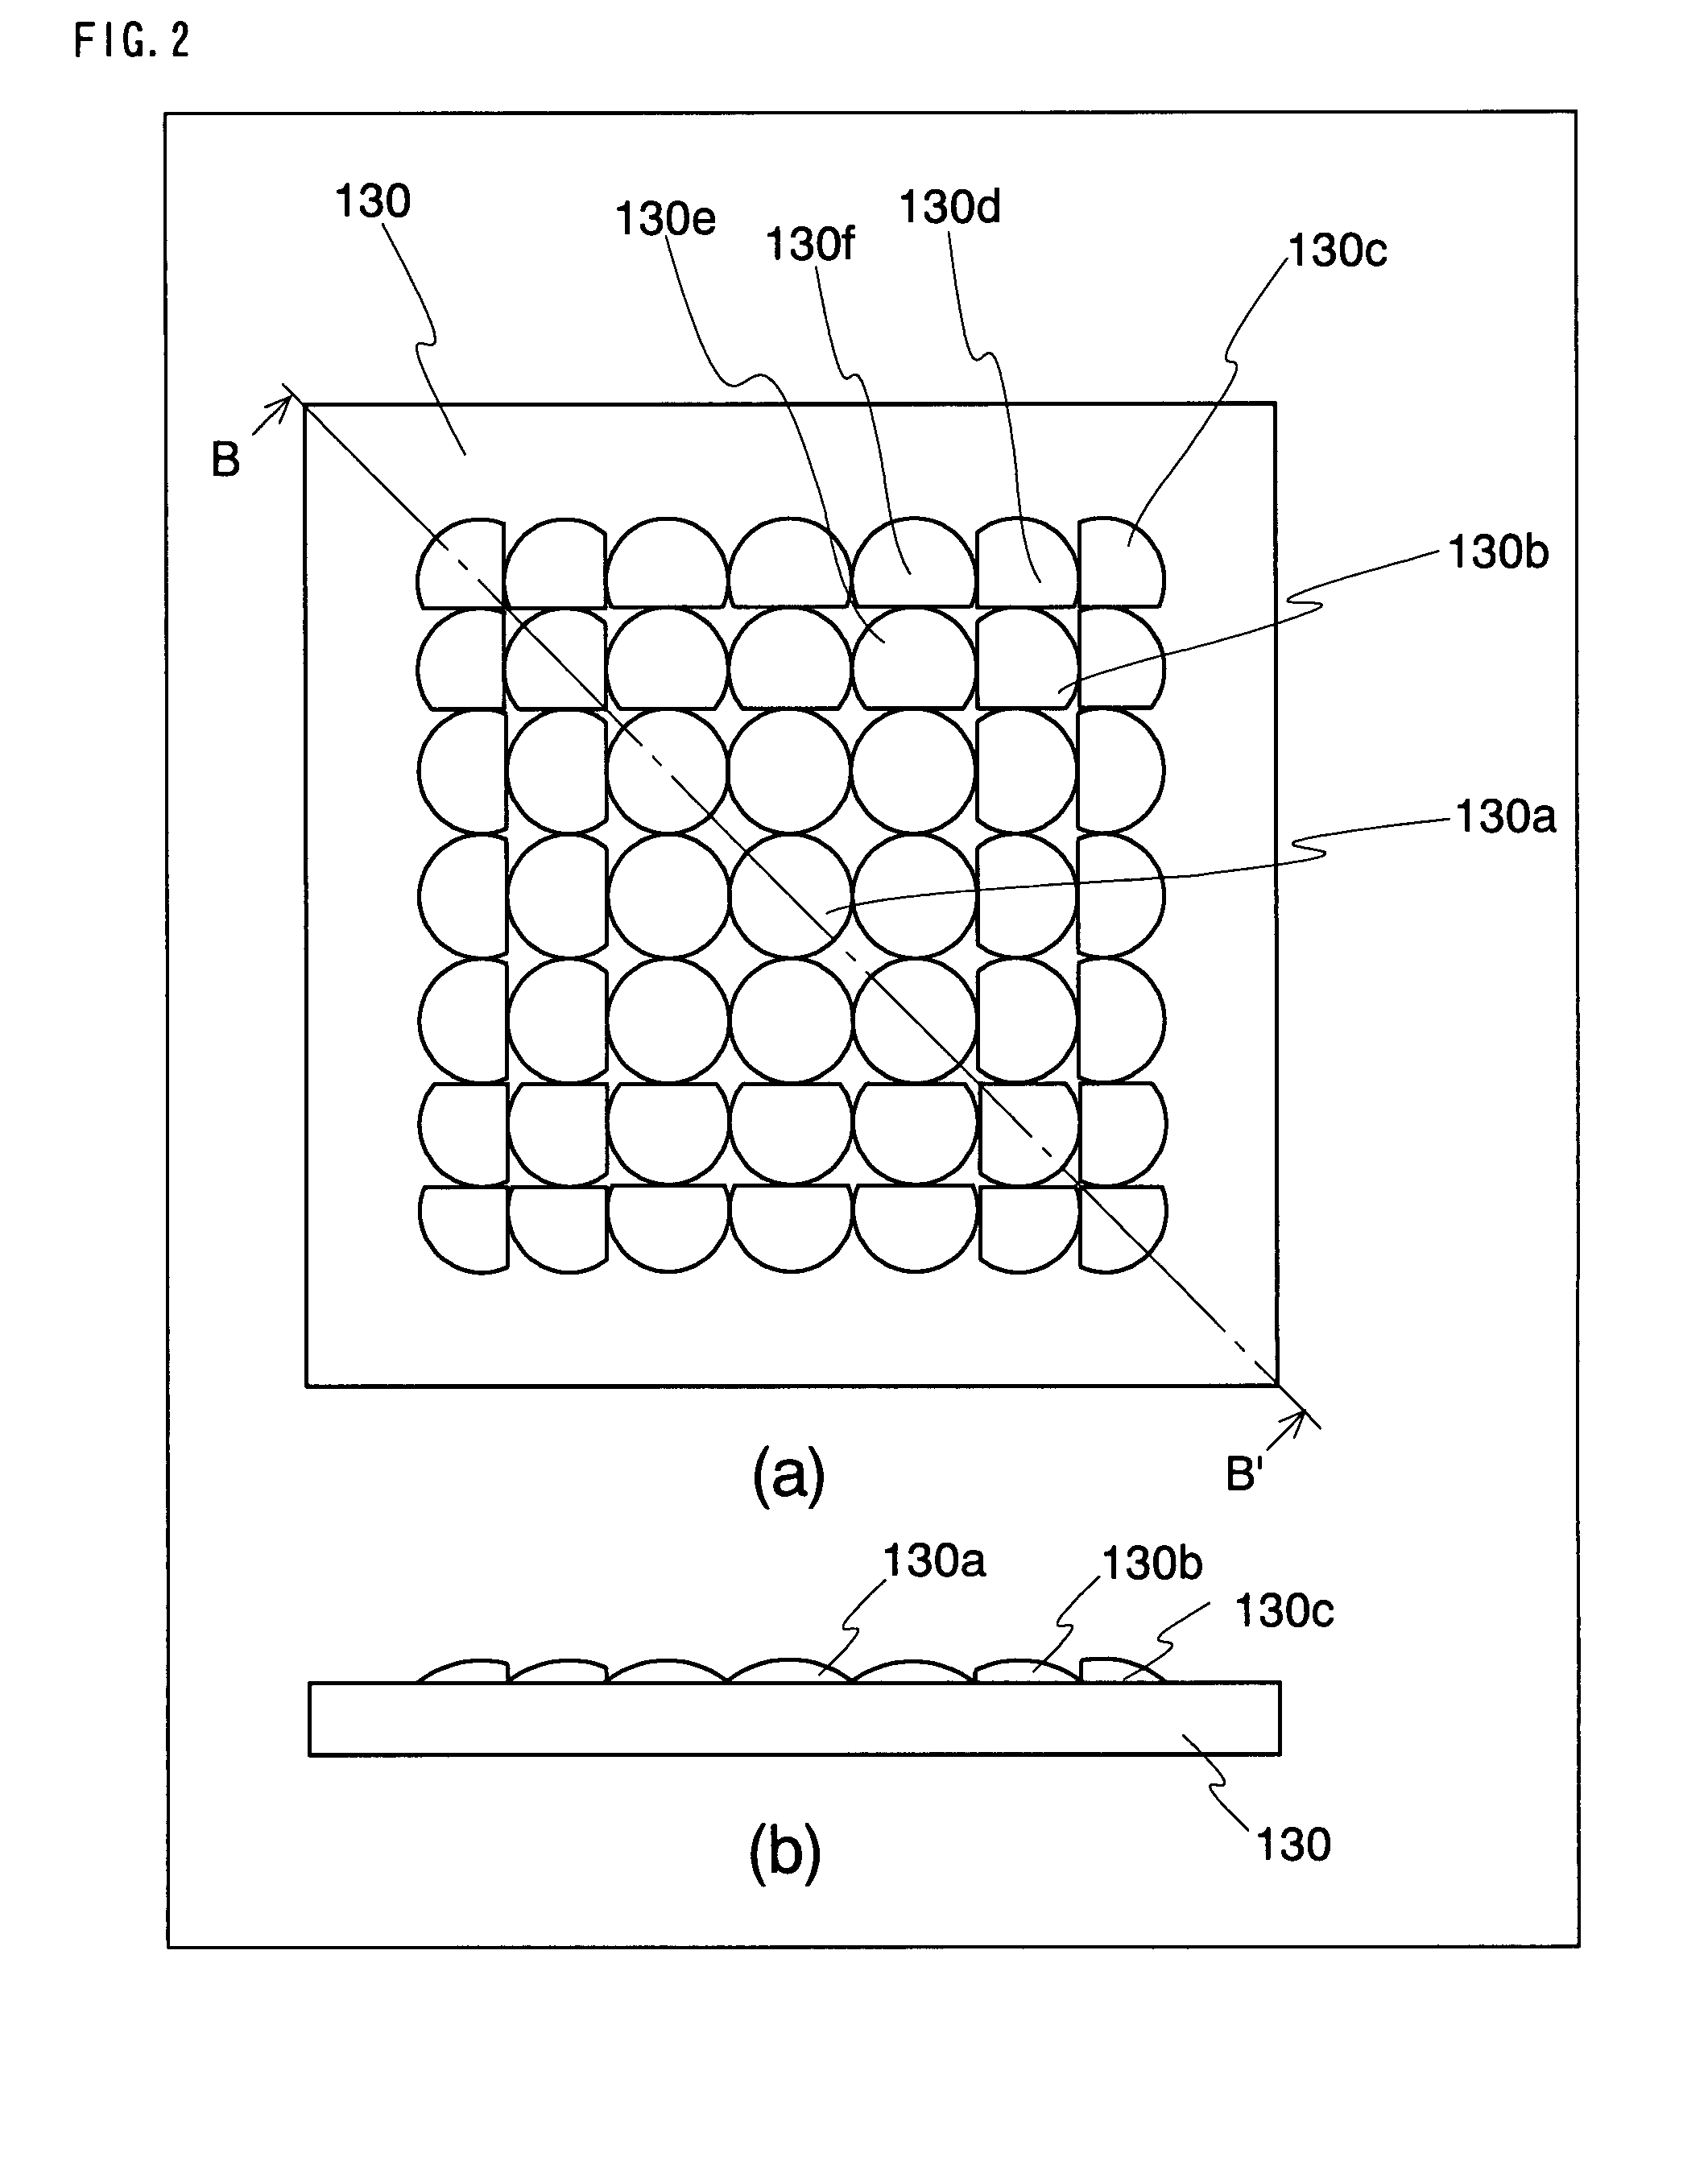 Imaging device including a plurality of lens elements and a imaging sensor